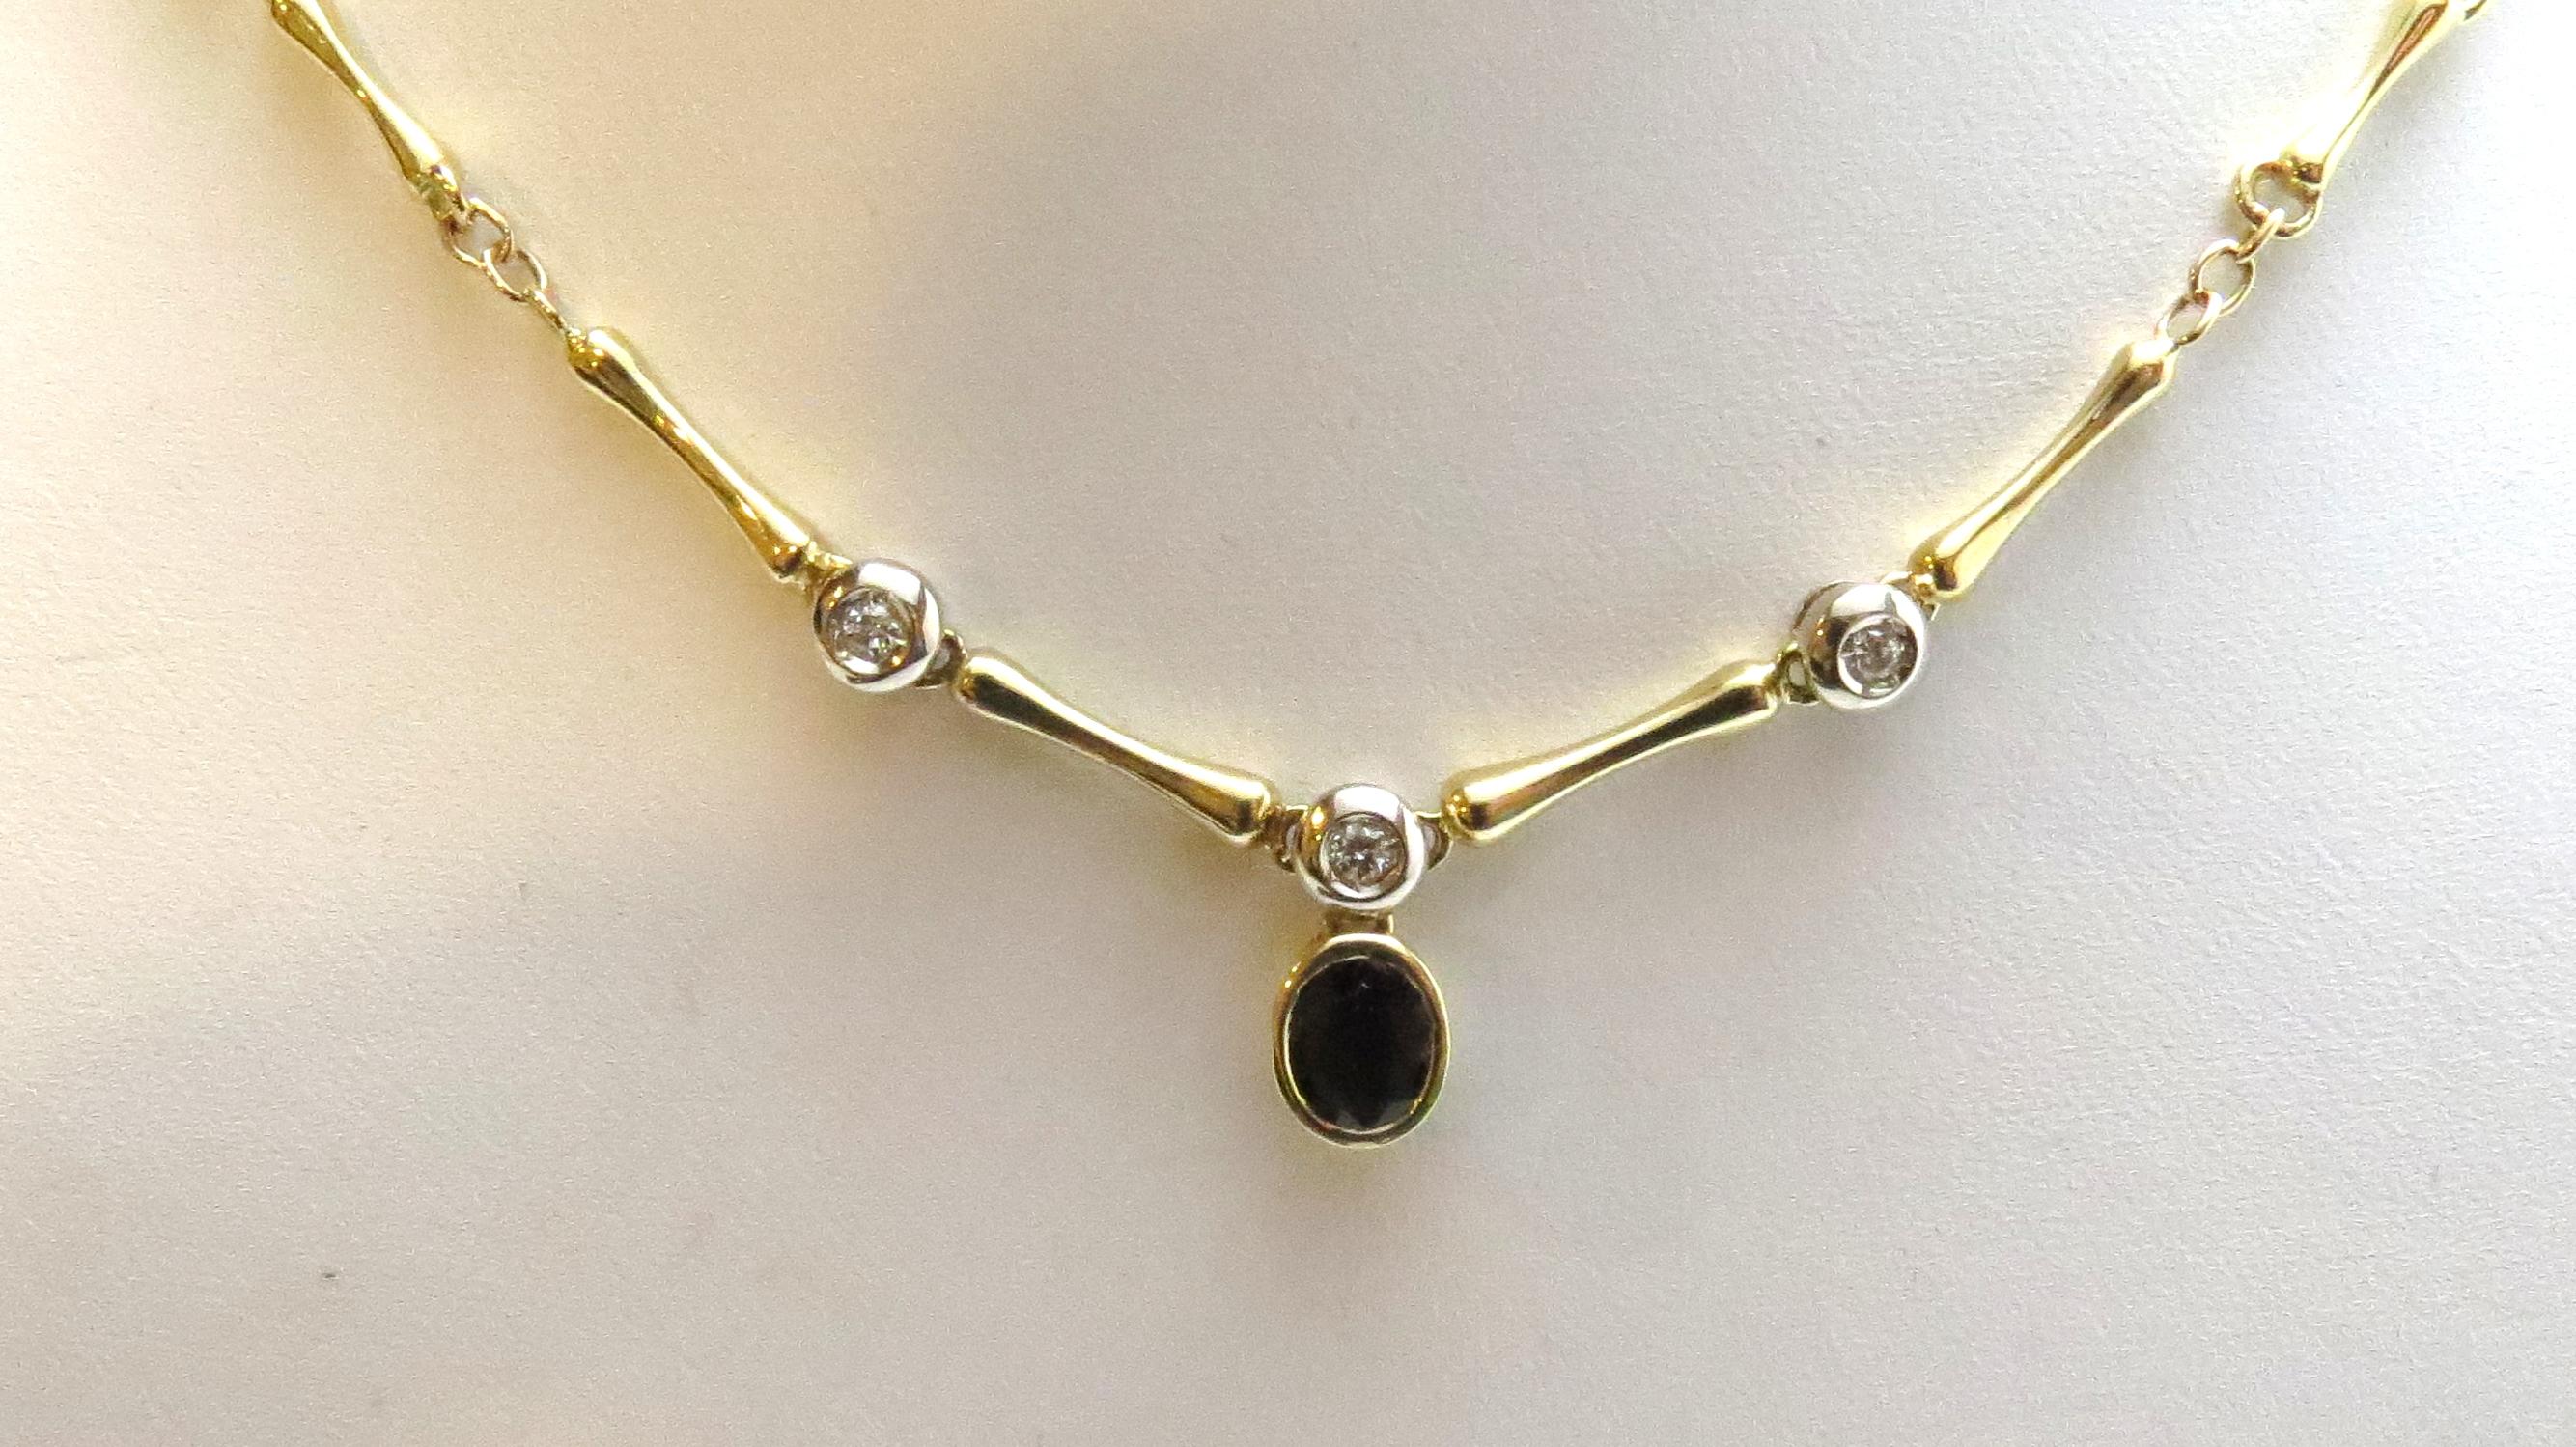 Vintage 18 Karat Yellow Gold Sapphire and Diamond Necklace.

This elegant necklace features one oval genuine sapphires (7 mm x 6 mm) accented with three round brilliant cut diamonds on a stunning 18K yellow gold necklace.

Approximate total diamond